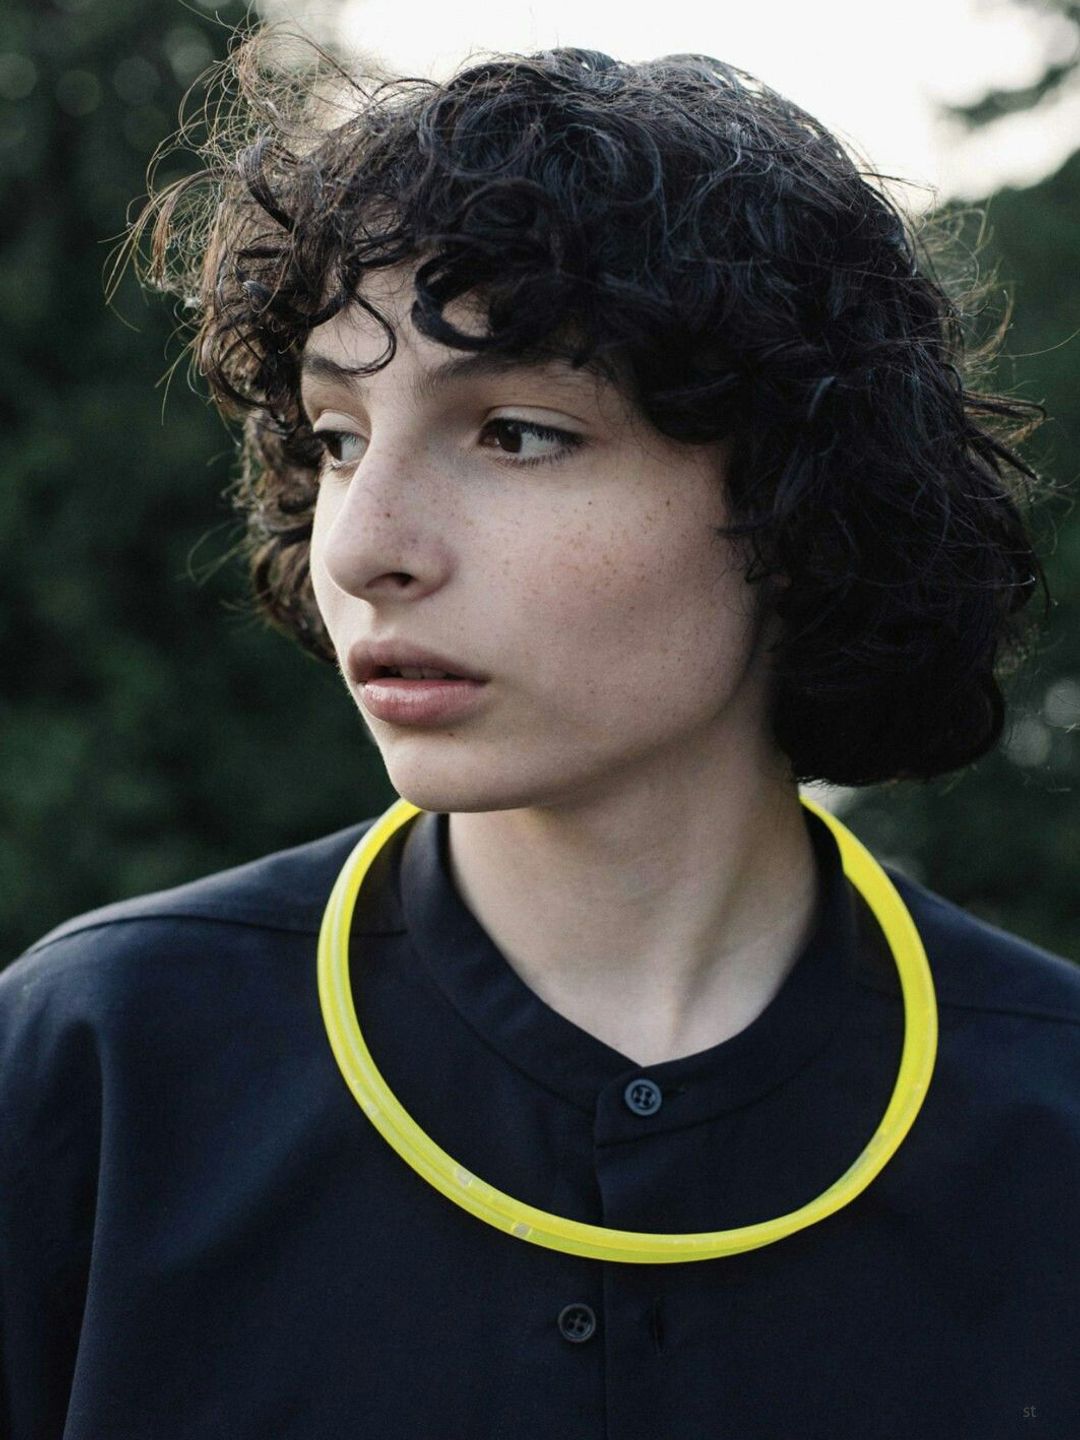 Finn Wolfhard who is his father